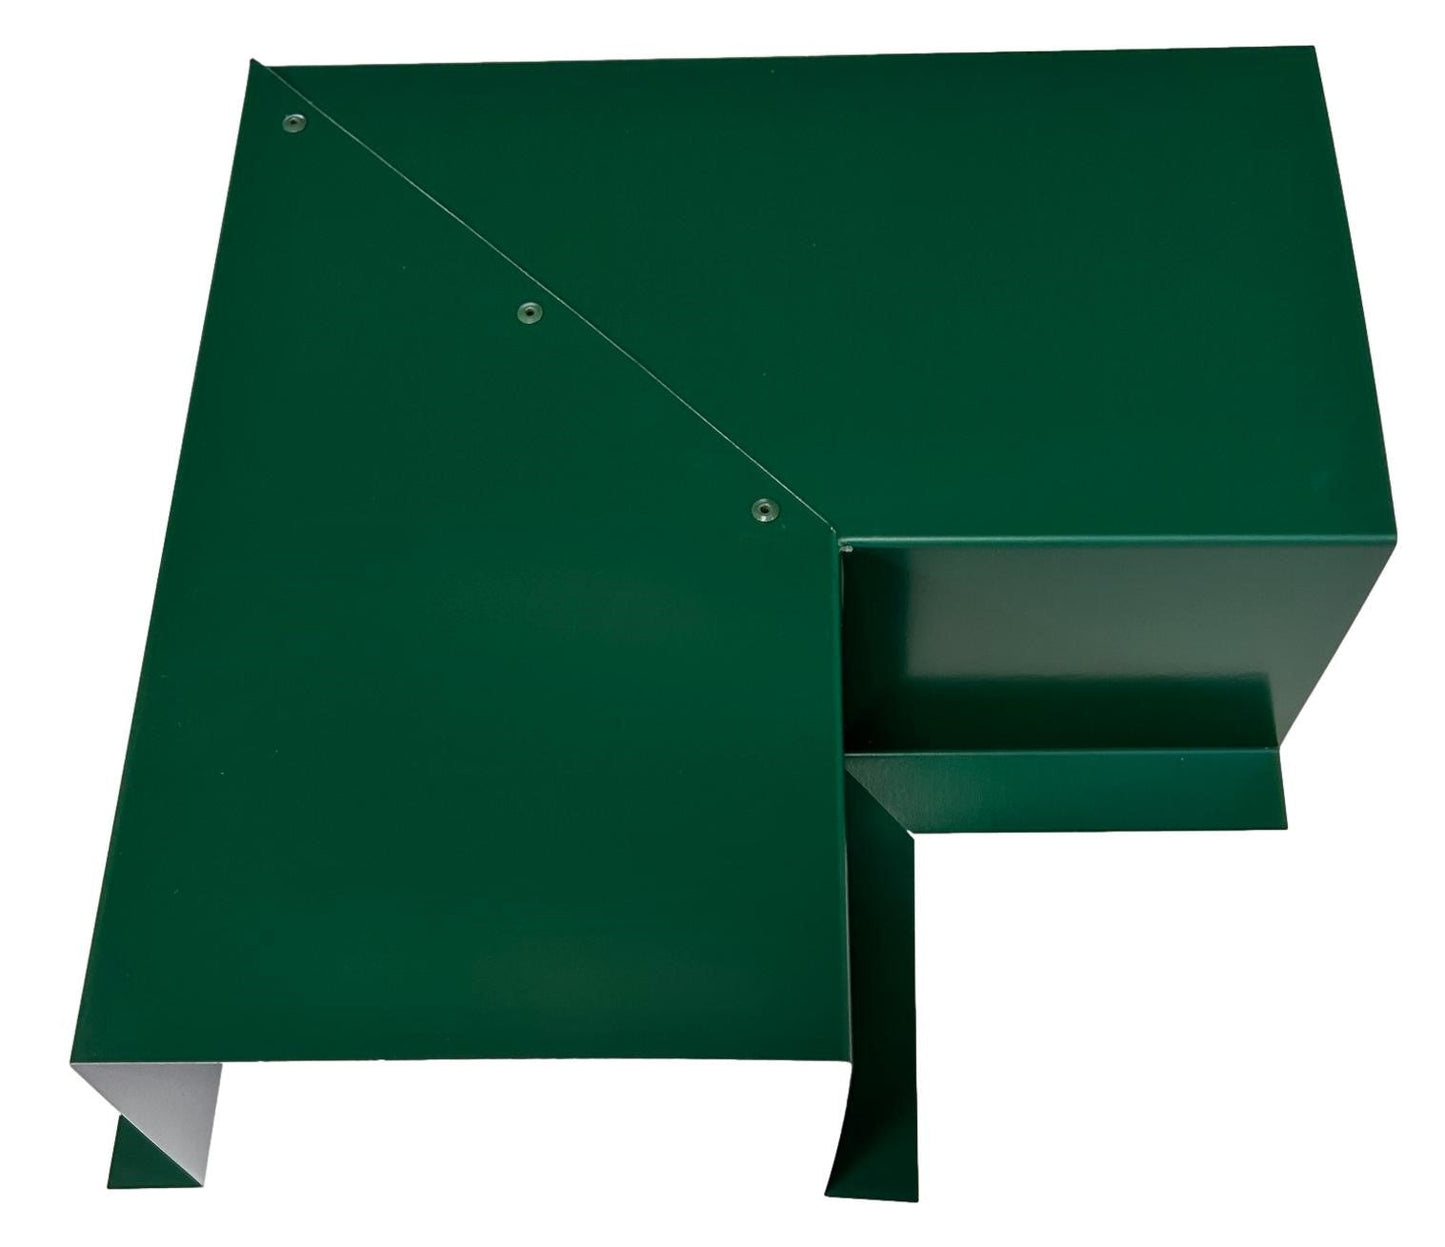 A green, geometric metal structure with multiple angled panels connected by screws. The design appears abstract with sharp lines and folds, forming an asymmetrical shape, and features Perma Cover Residential Series - Line Set Cover Side Turning Elbows - Premium Quality for easy installation.